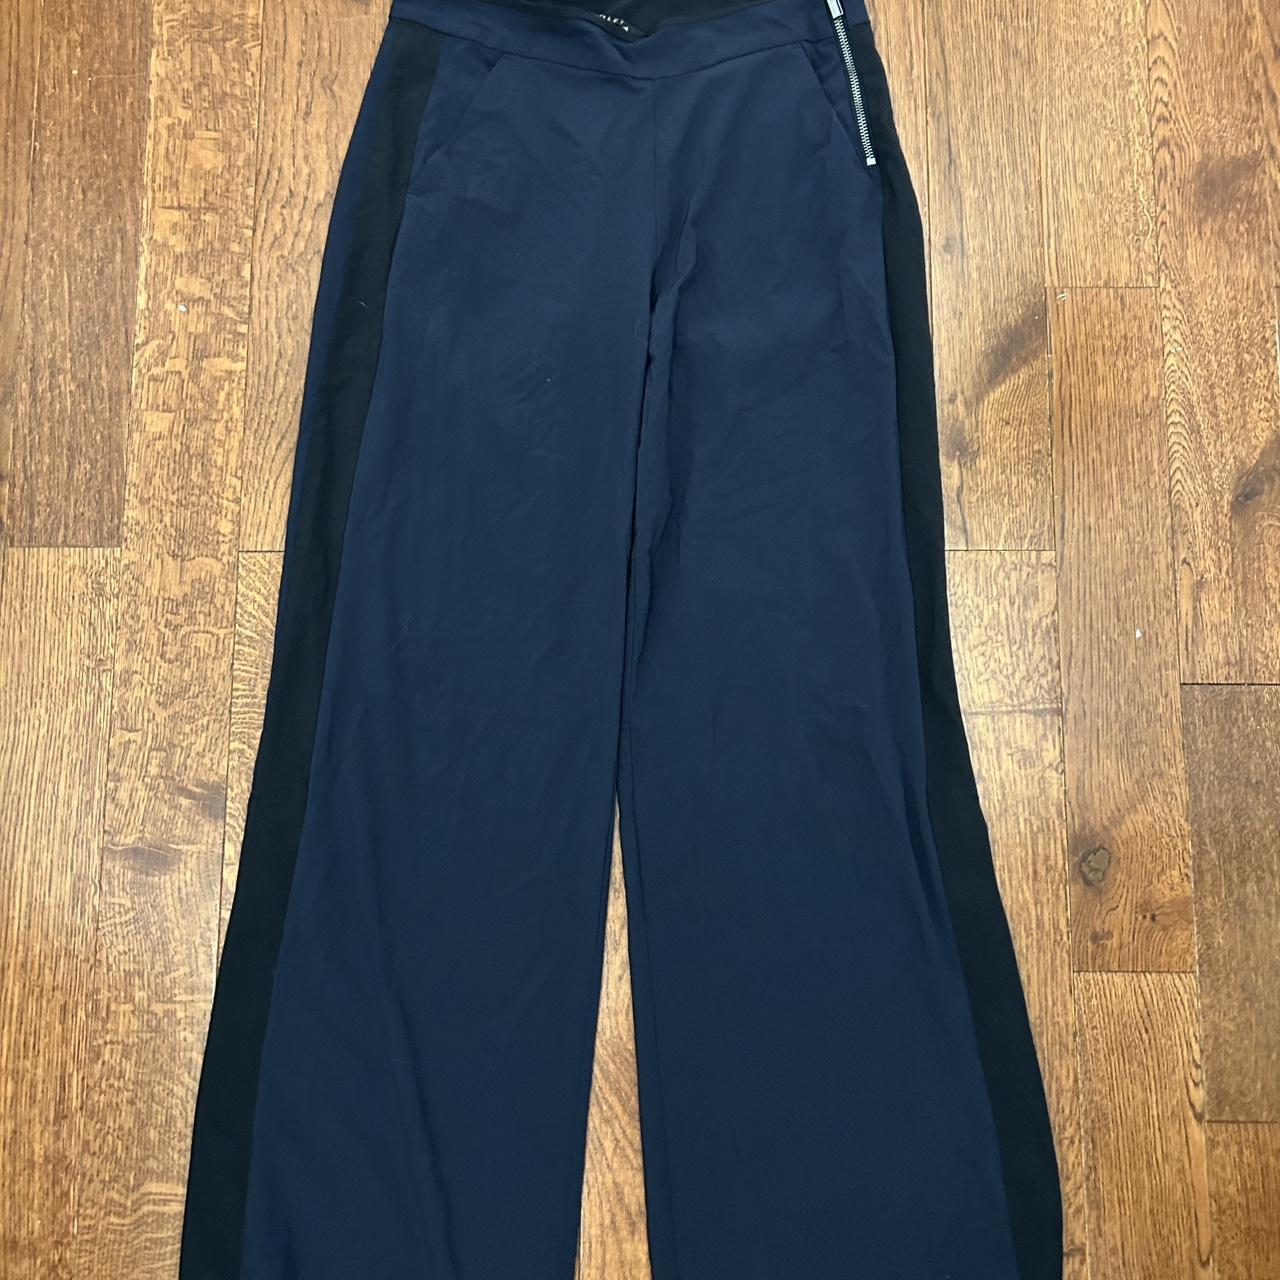 Athleta Women's Navy and Blue Trousers